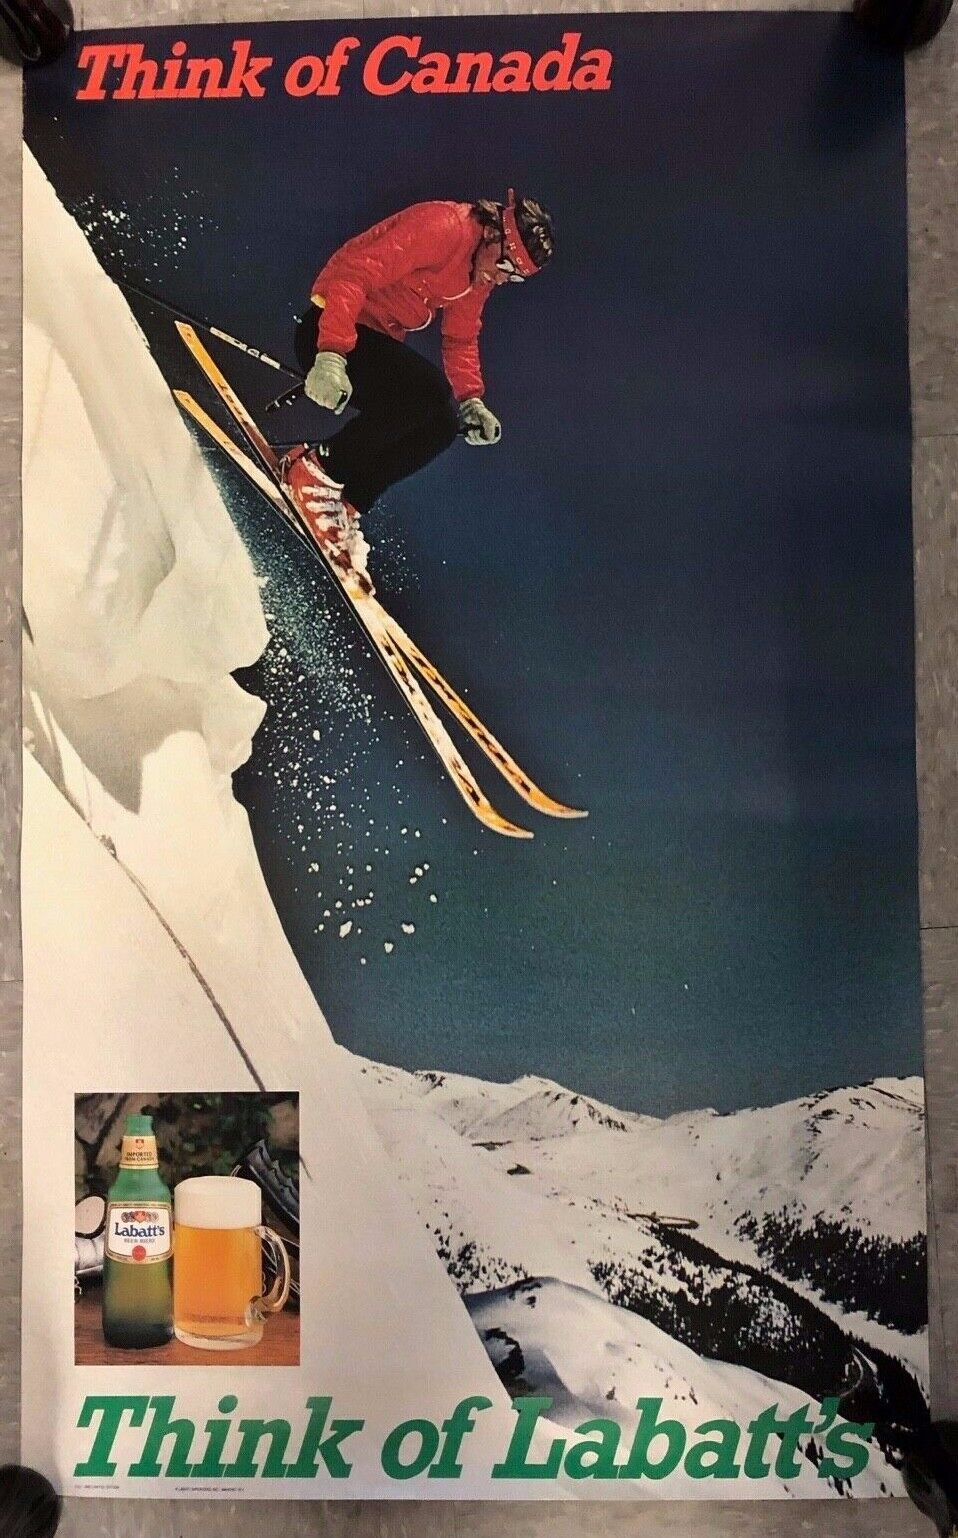 1980 Poster *Think of Labatts Beer* Poster Skiing CANDIAN SKIING 22X36’' M4 PB16